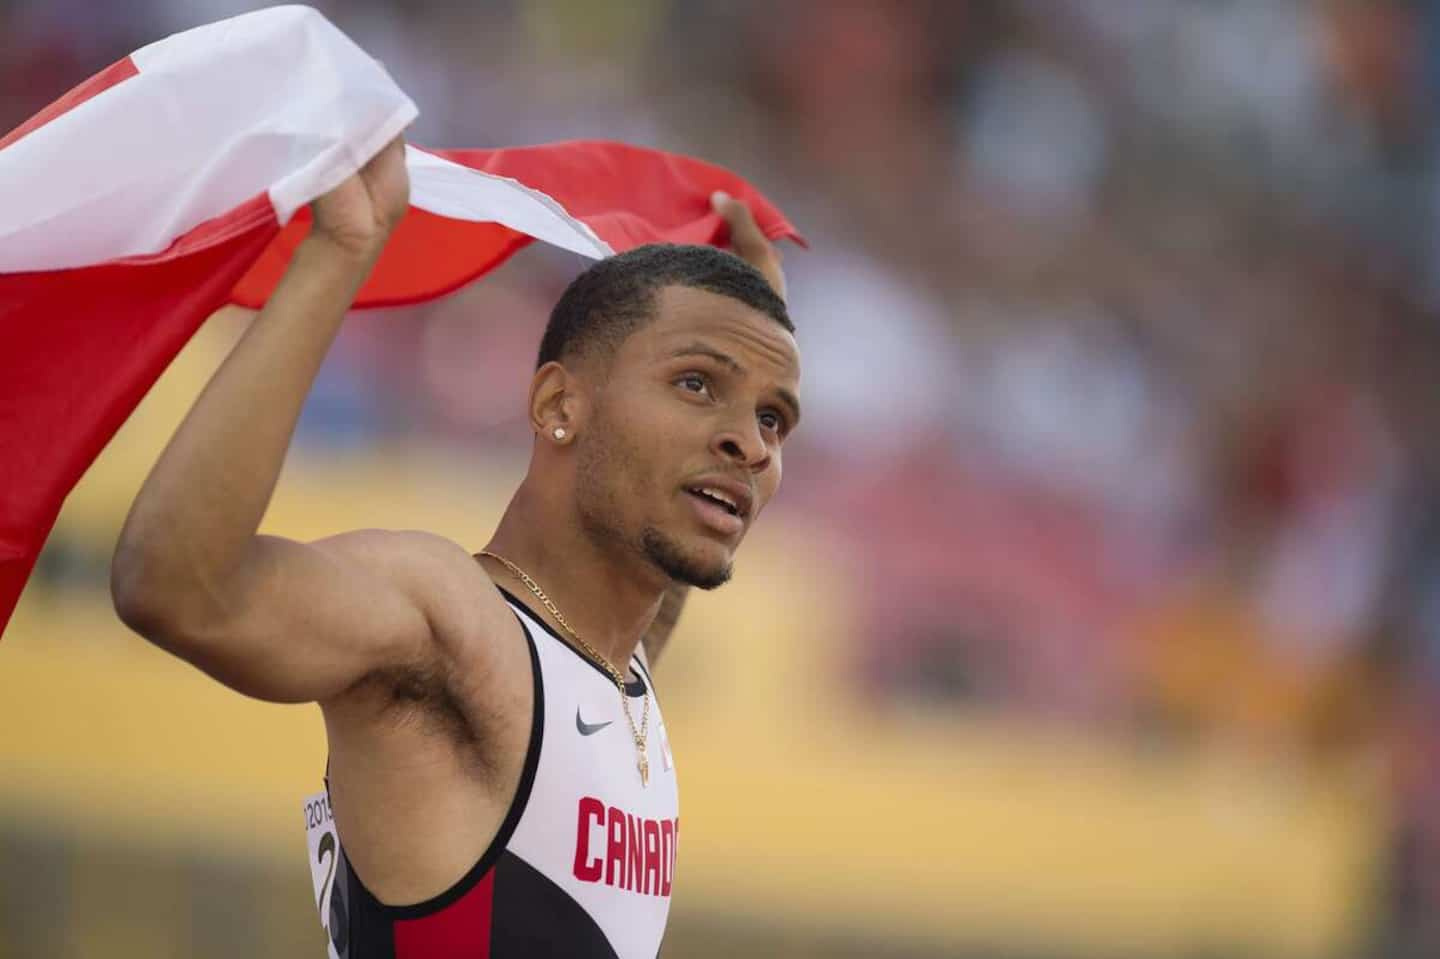 Andre De Grasse retires from the 200 meters